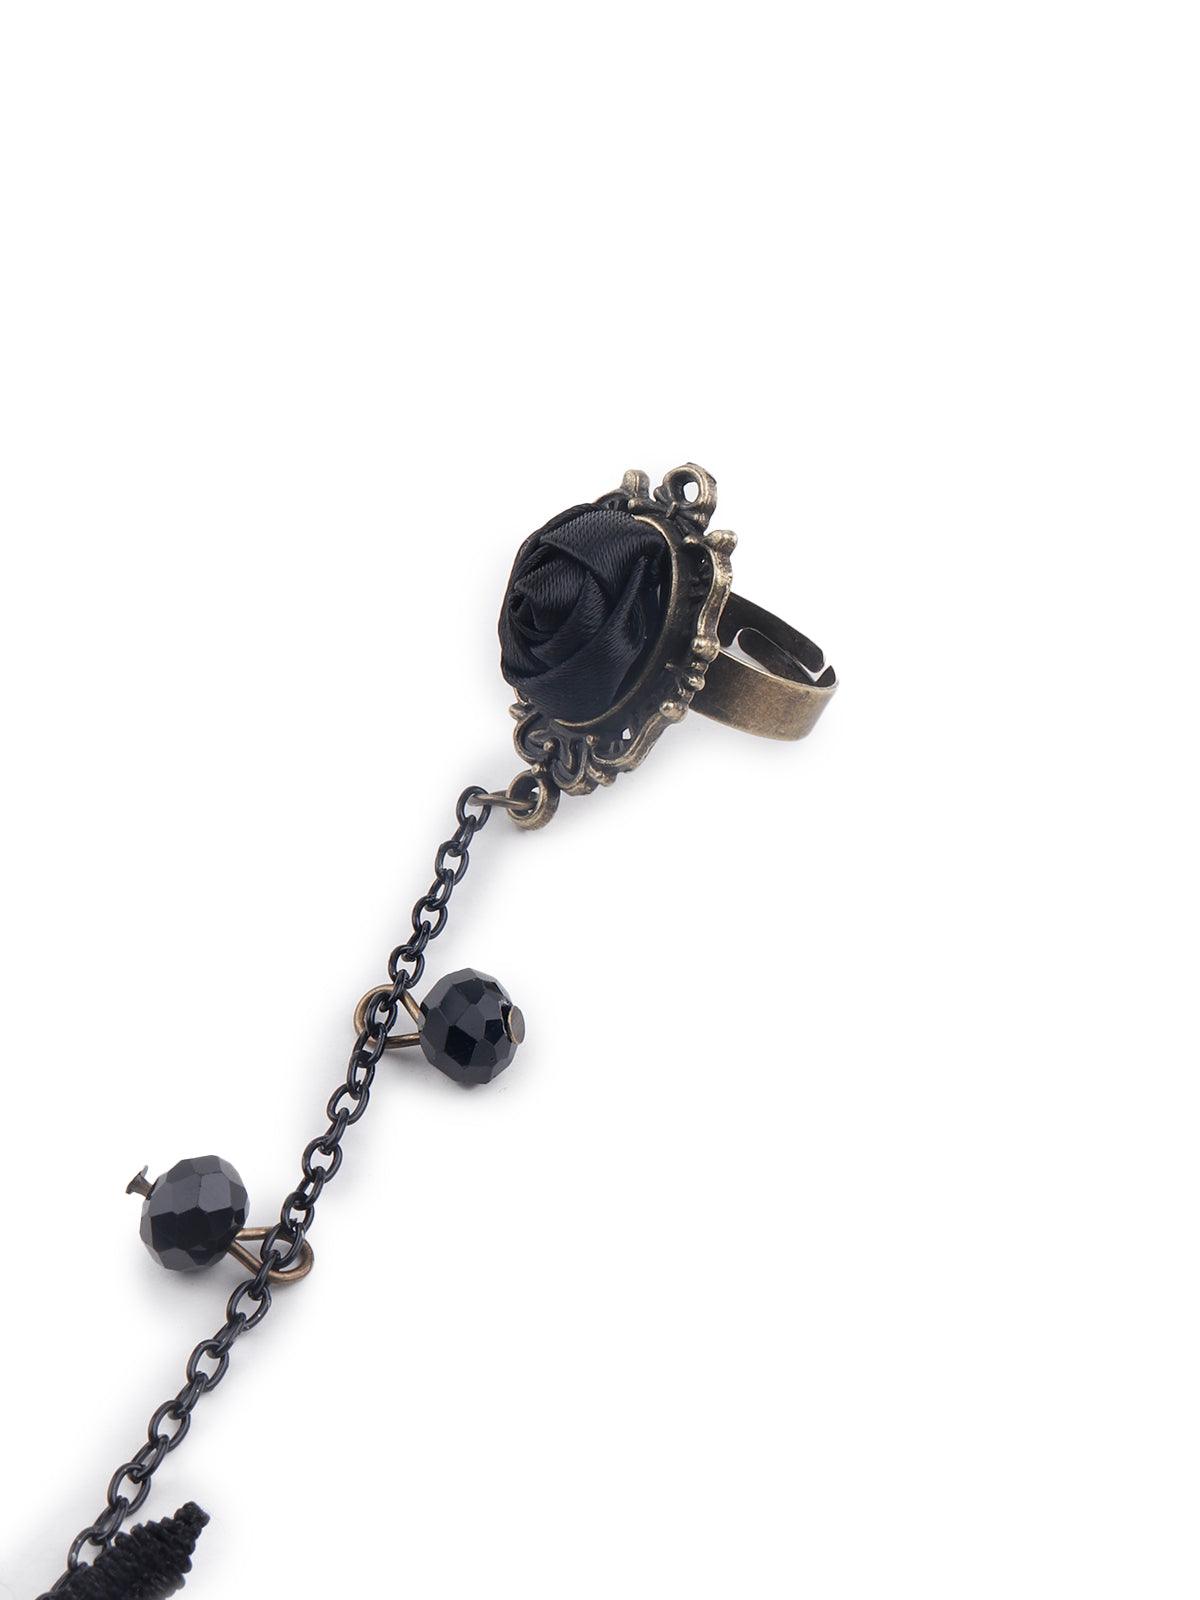 Women's Black Lace Bracelet Secured With A Ring Chain - Odette